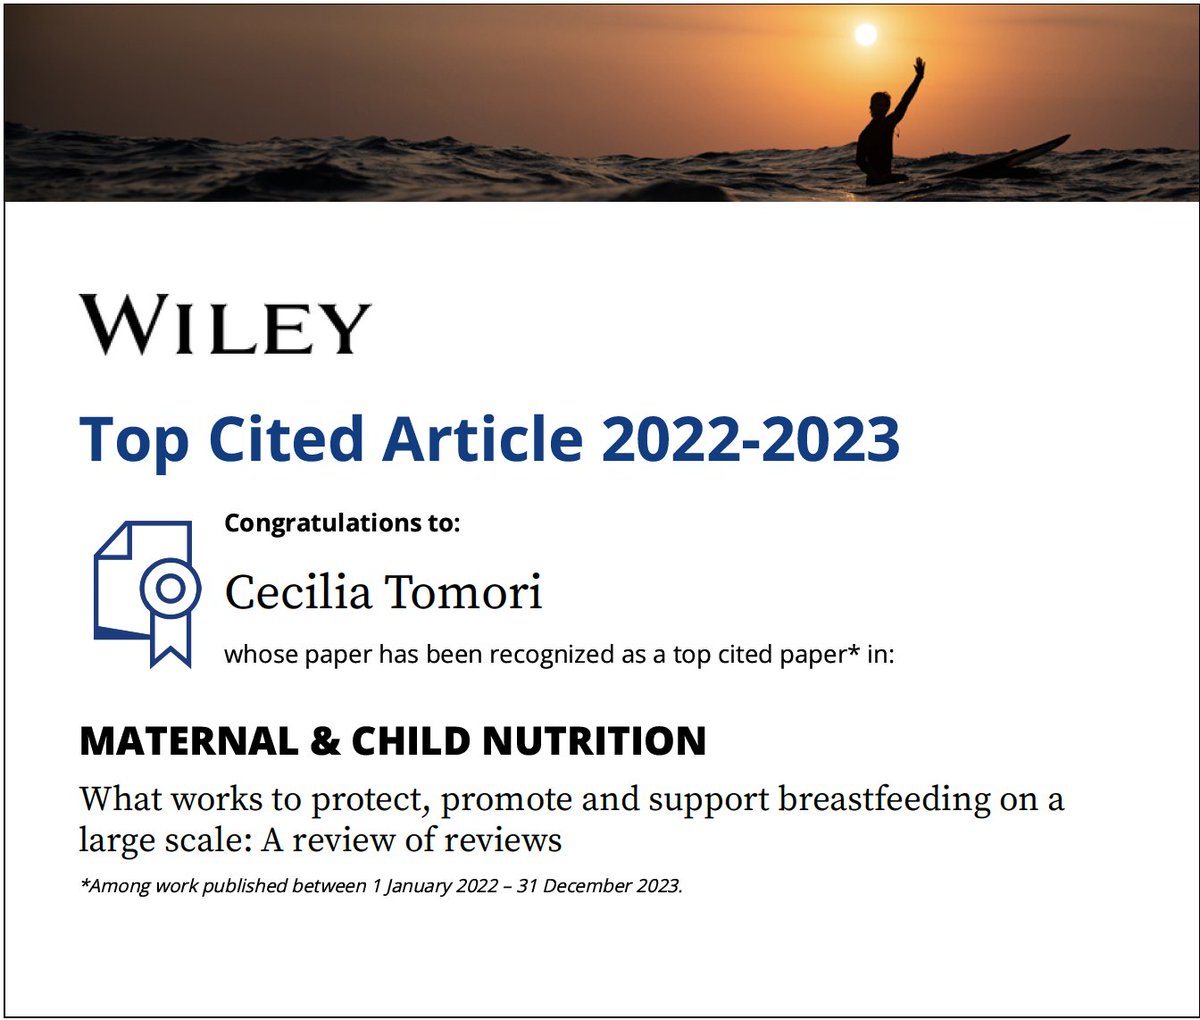 Good news! Our article received enough citations to be a #TopCitedArticle in Maternal & Child Nutrition @JHUNursing @rperezescamilla @sonialhc onlinelibrary.wiley.com/doi/10.1111/mc…